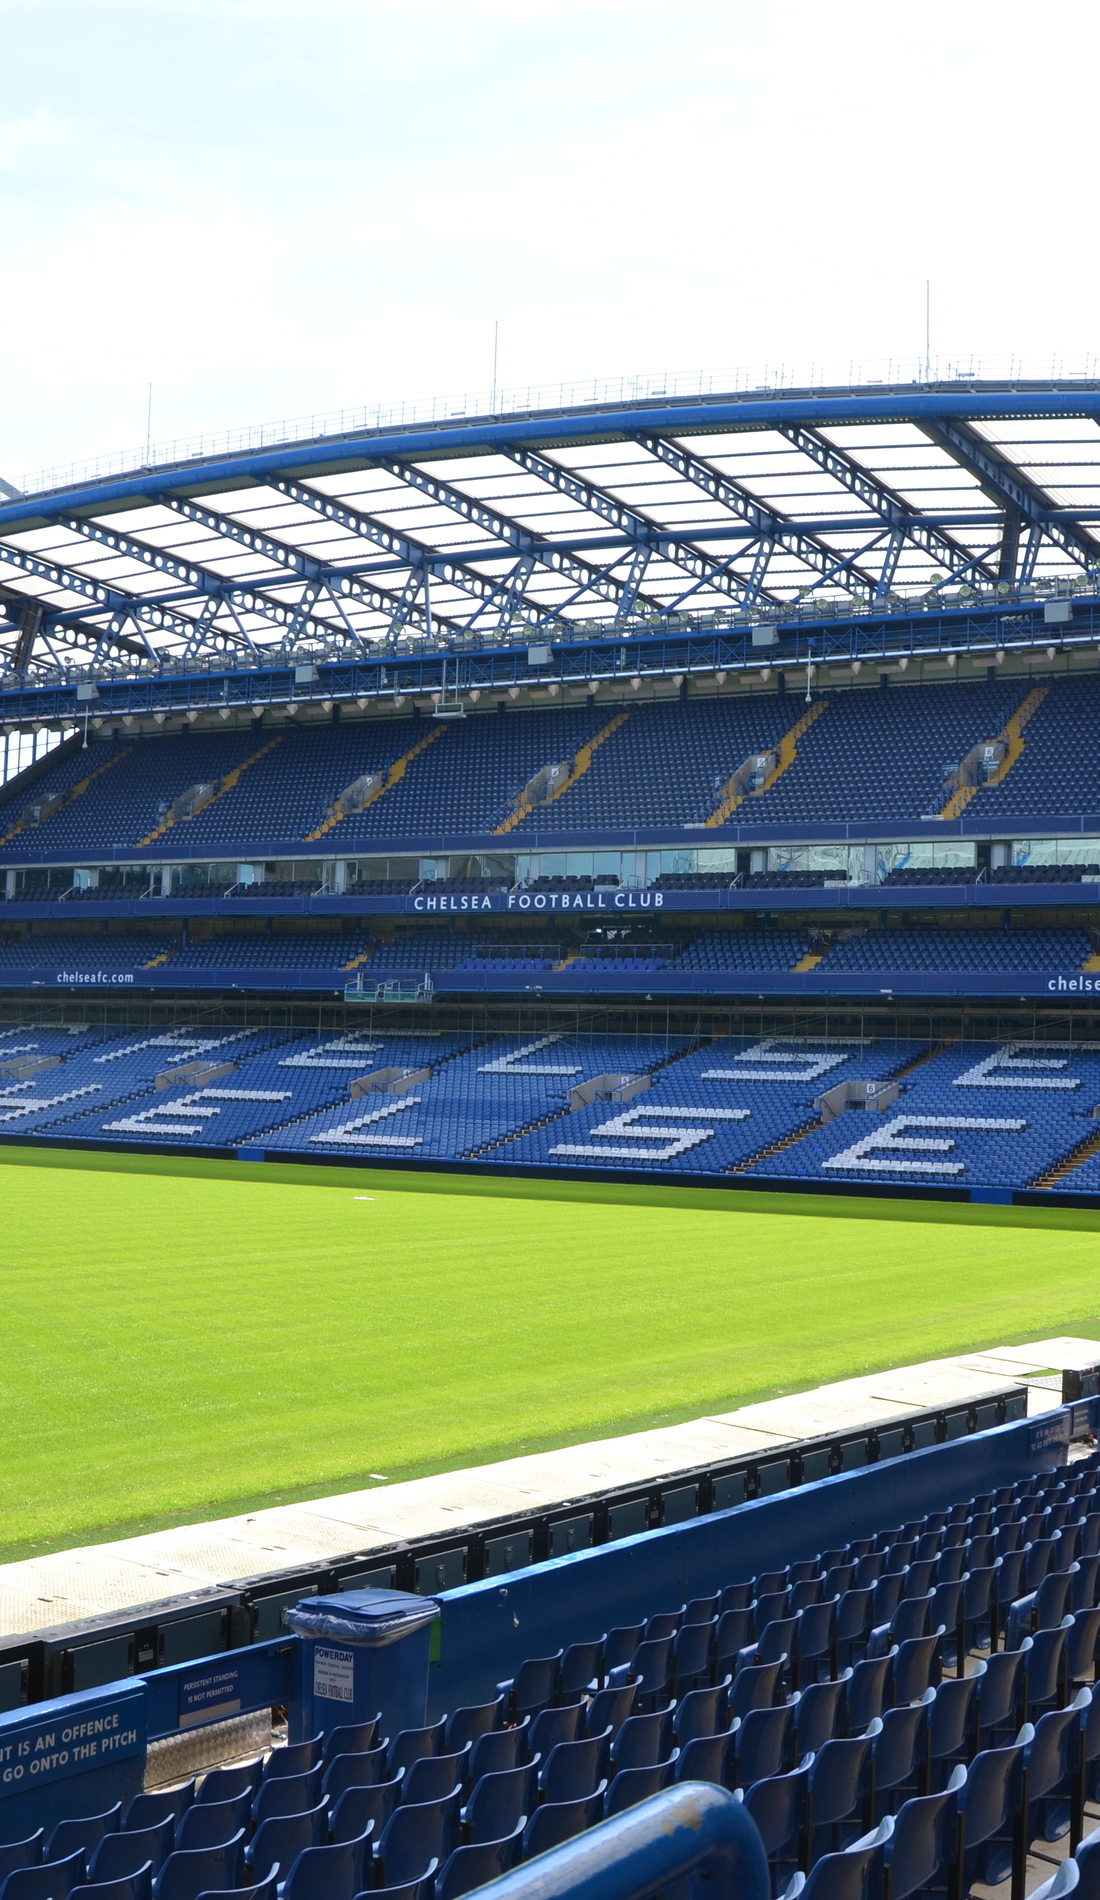 A Chelsea FC live event